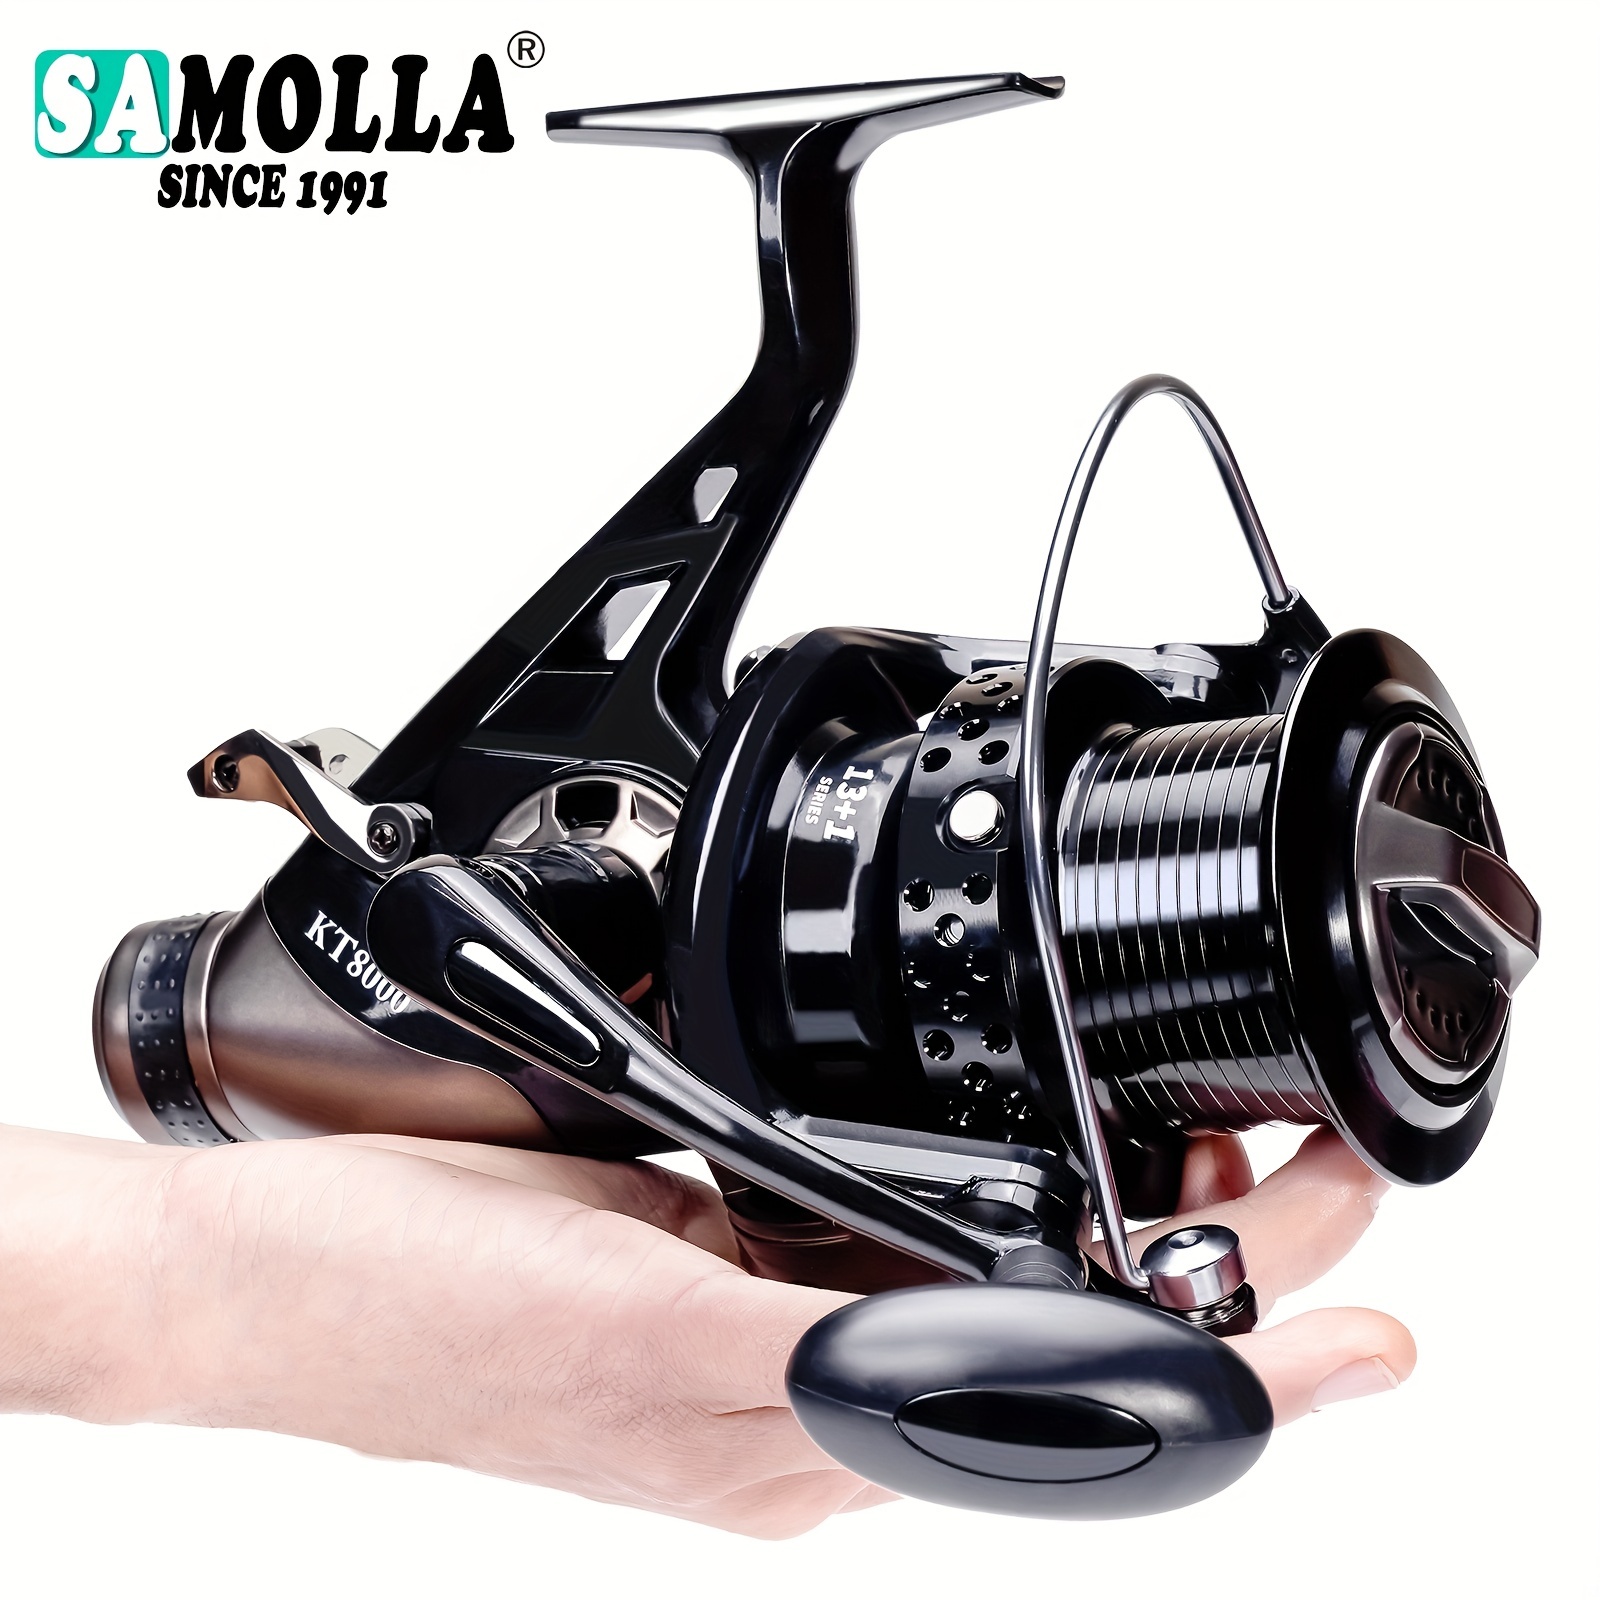 

13-23kg Strong Double Drag Spinning Reel - Perfect For Carp Fishing!